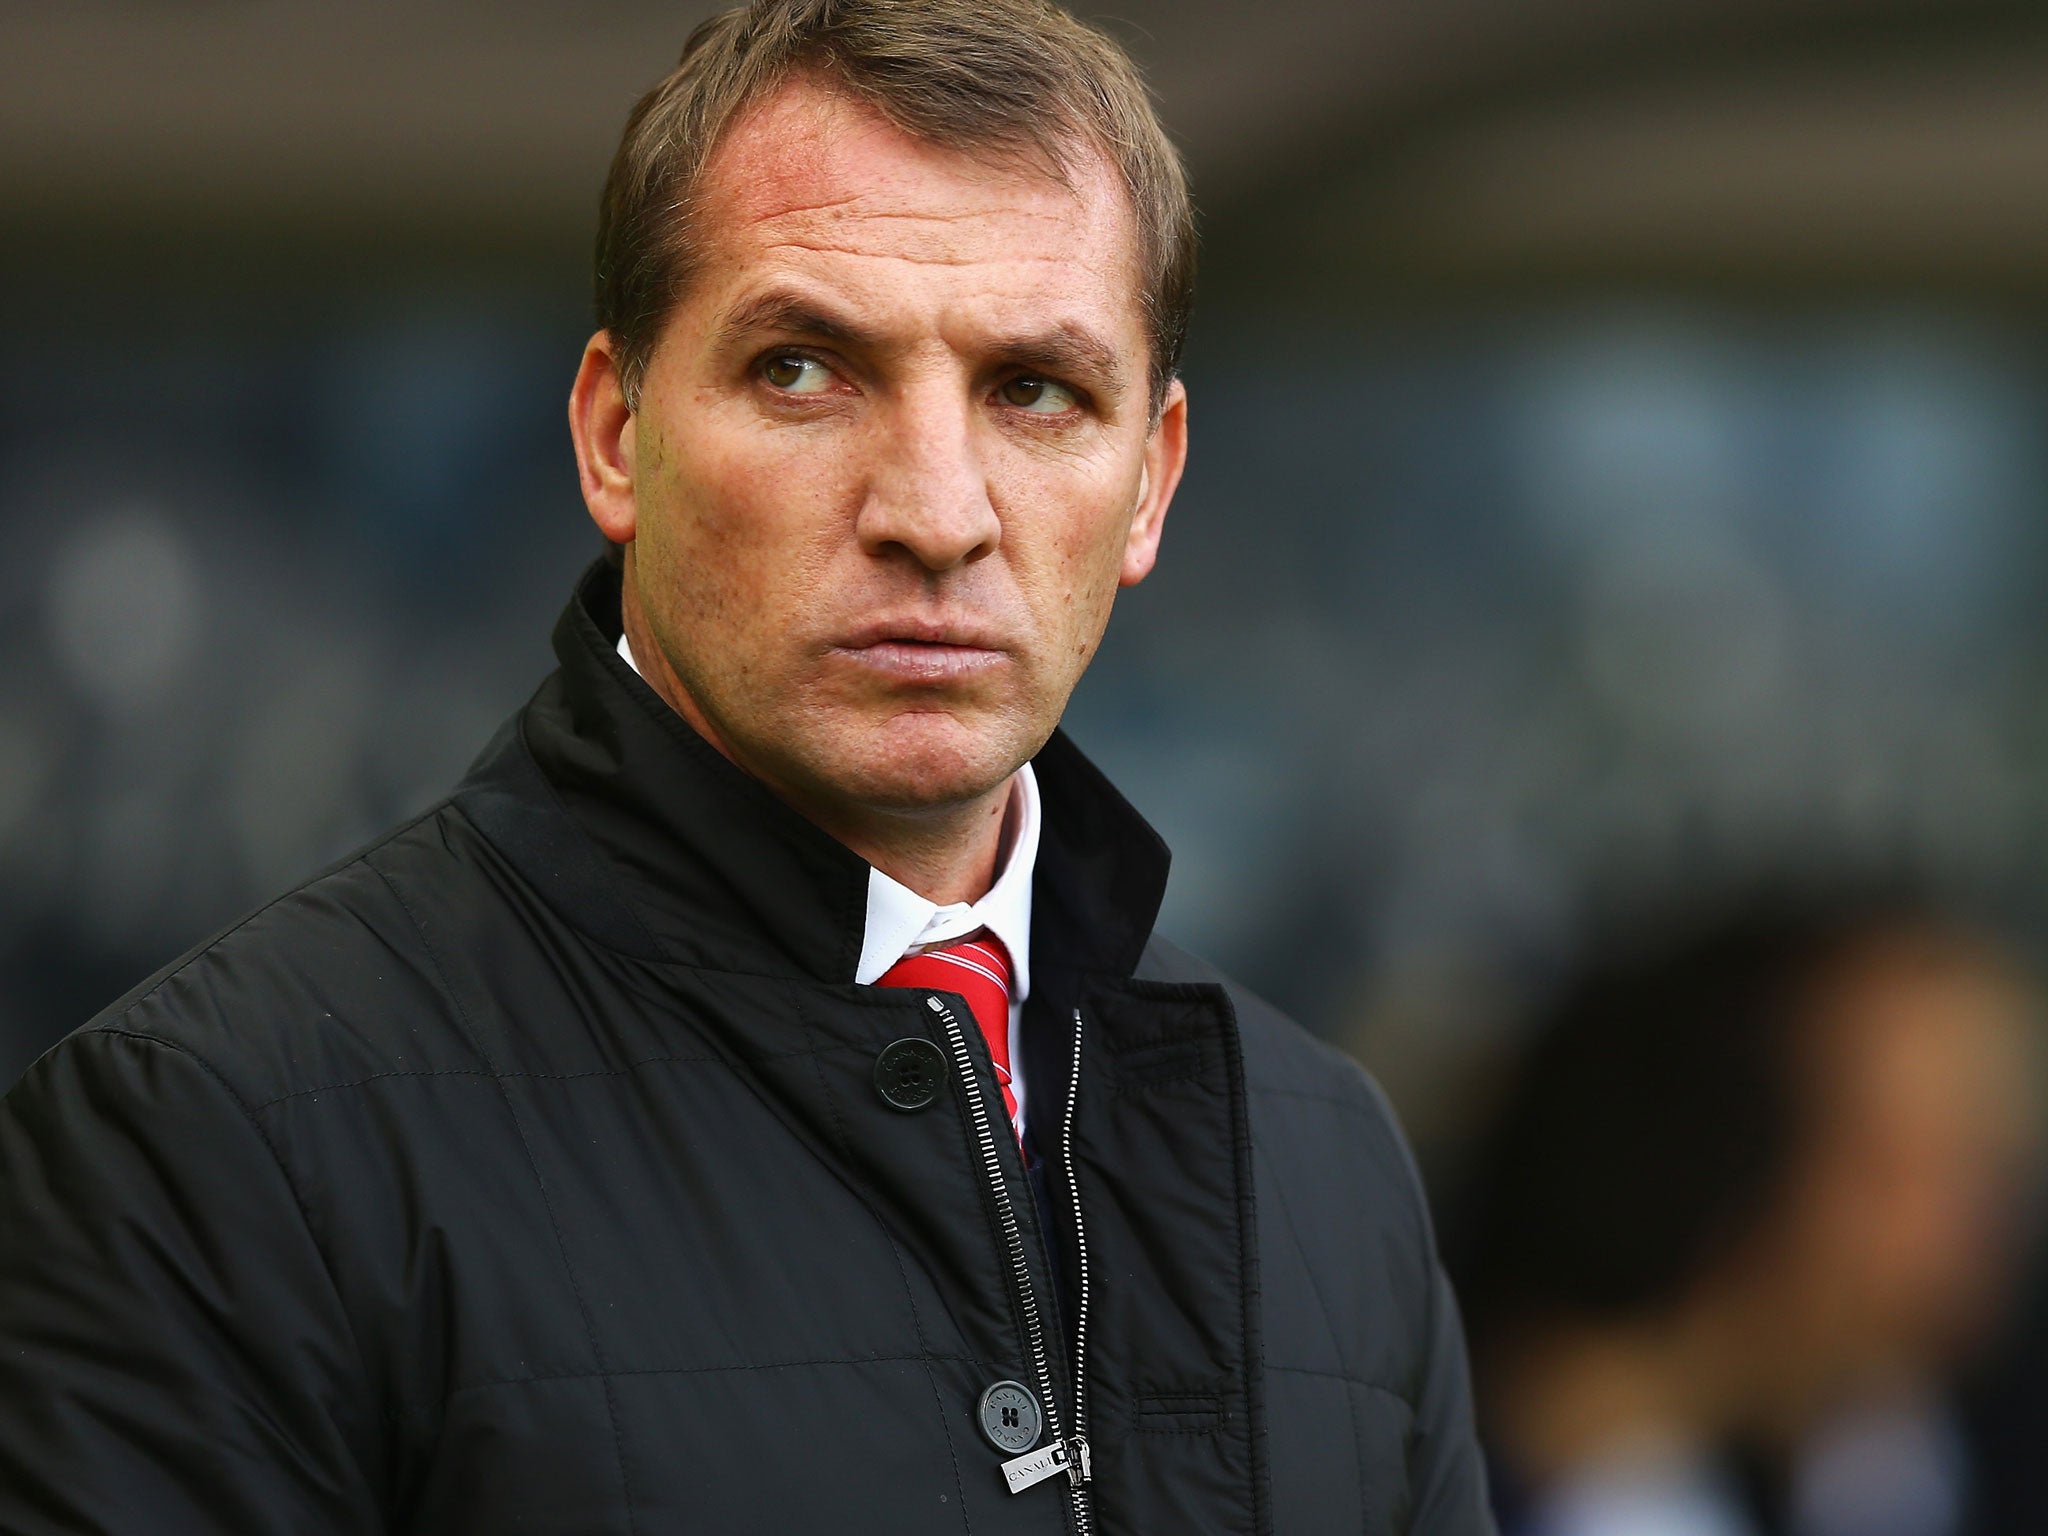 Brendan Rodgers has been charged by the FA